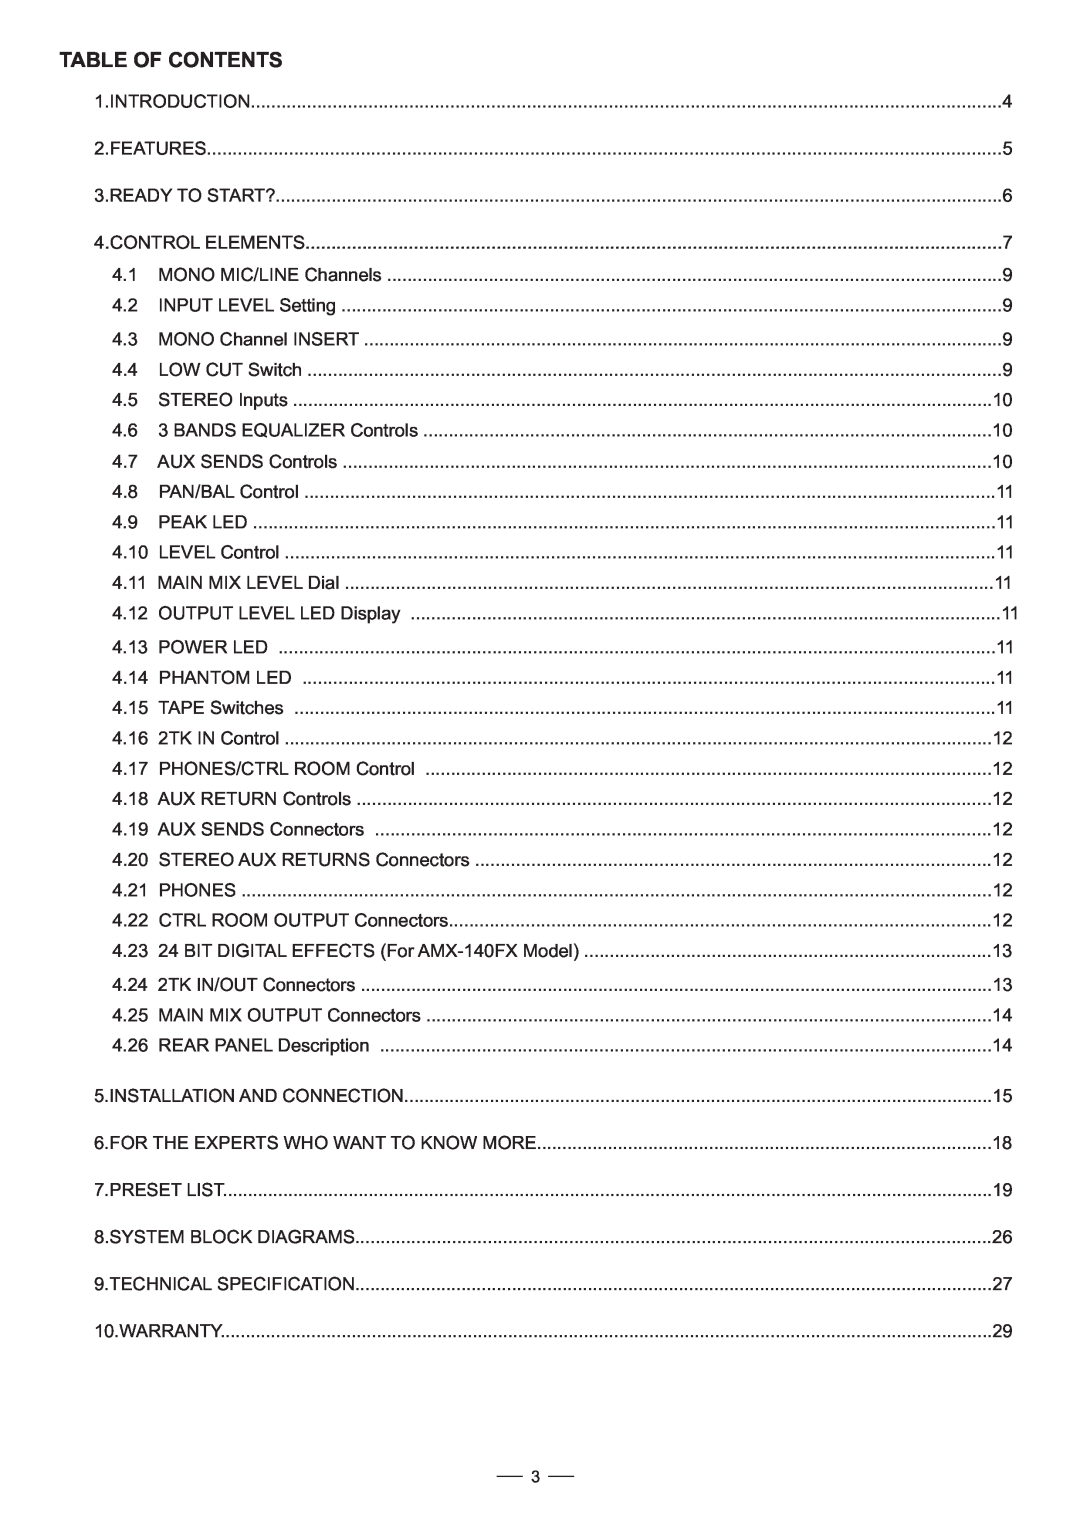 Nilfisk-ALTO AMX-140FX user manual Table Of Contents 